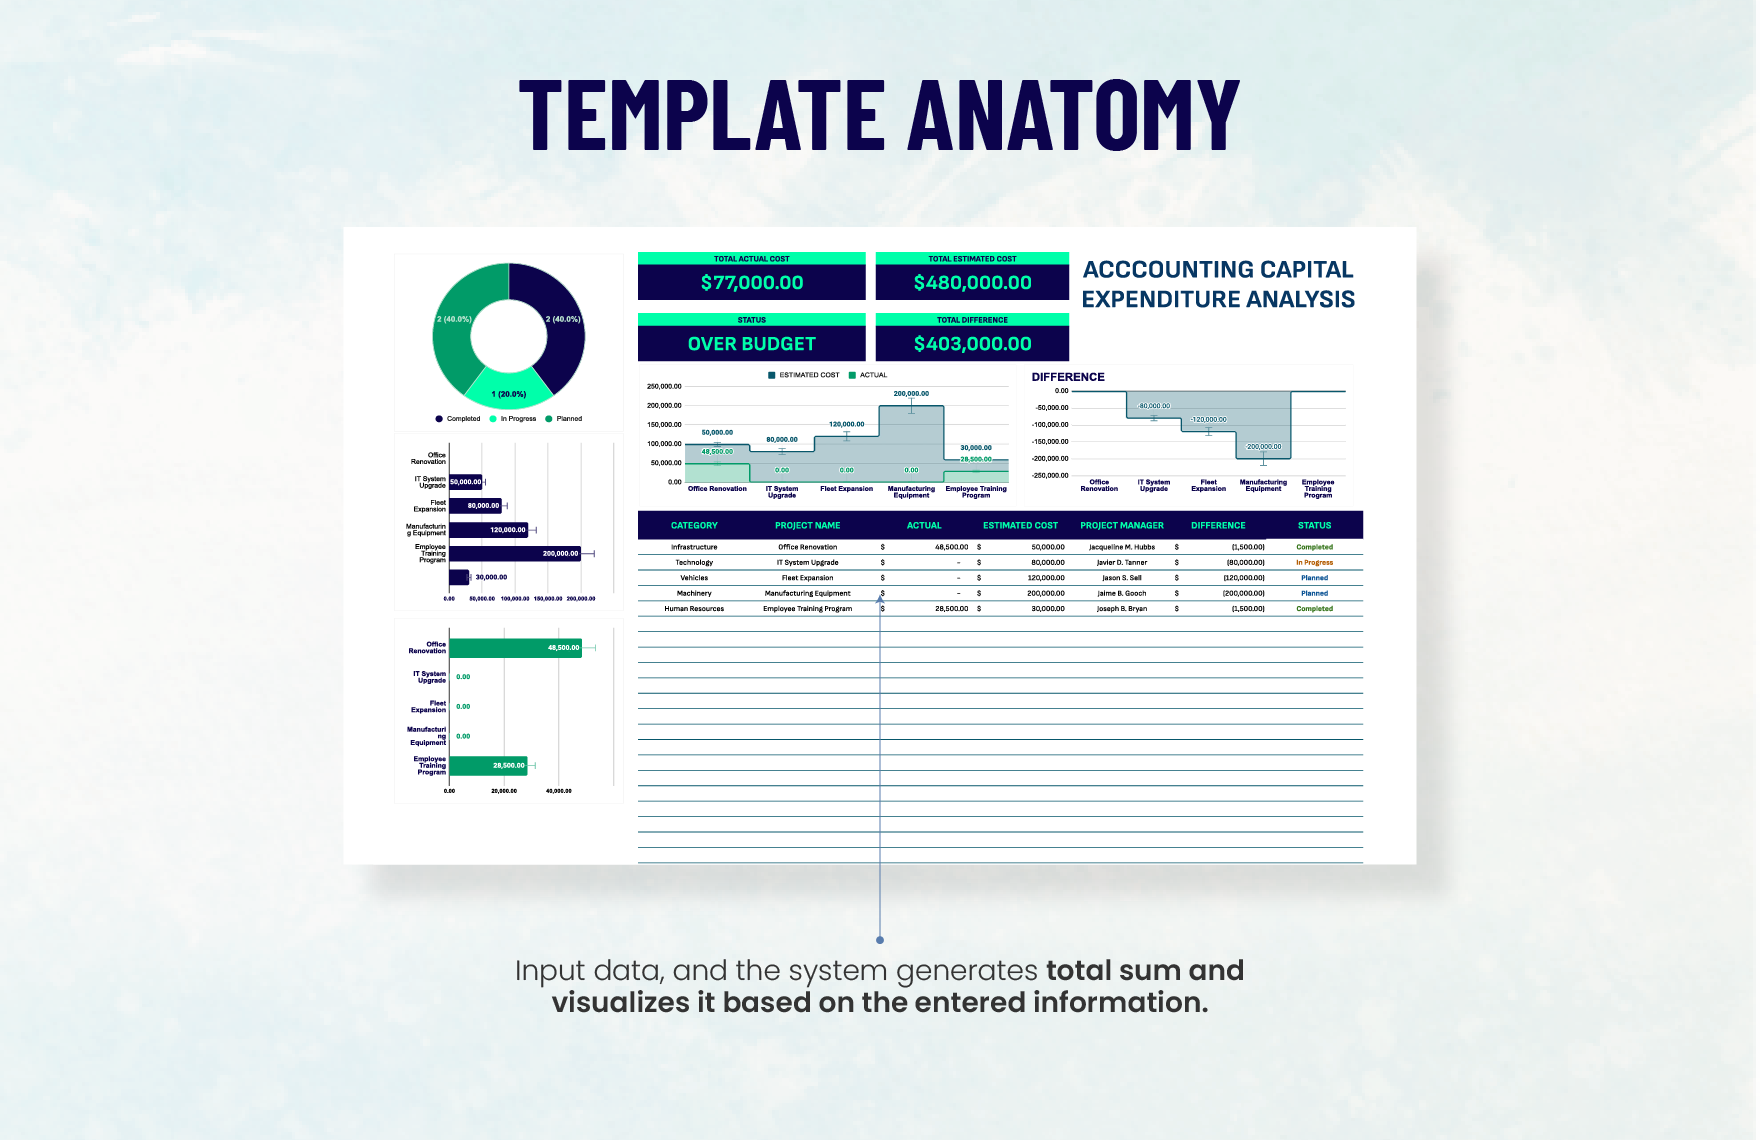 Accounting Capital Expenditure Analysis Template